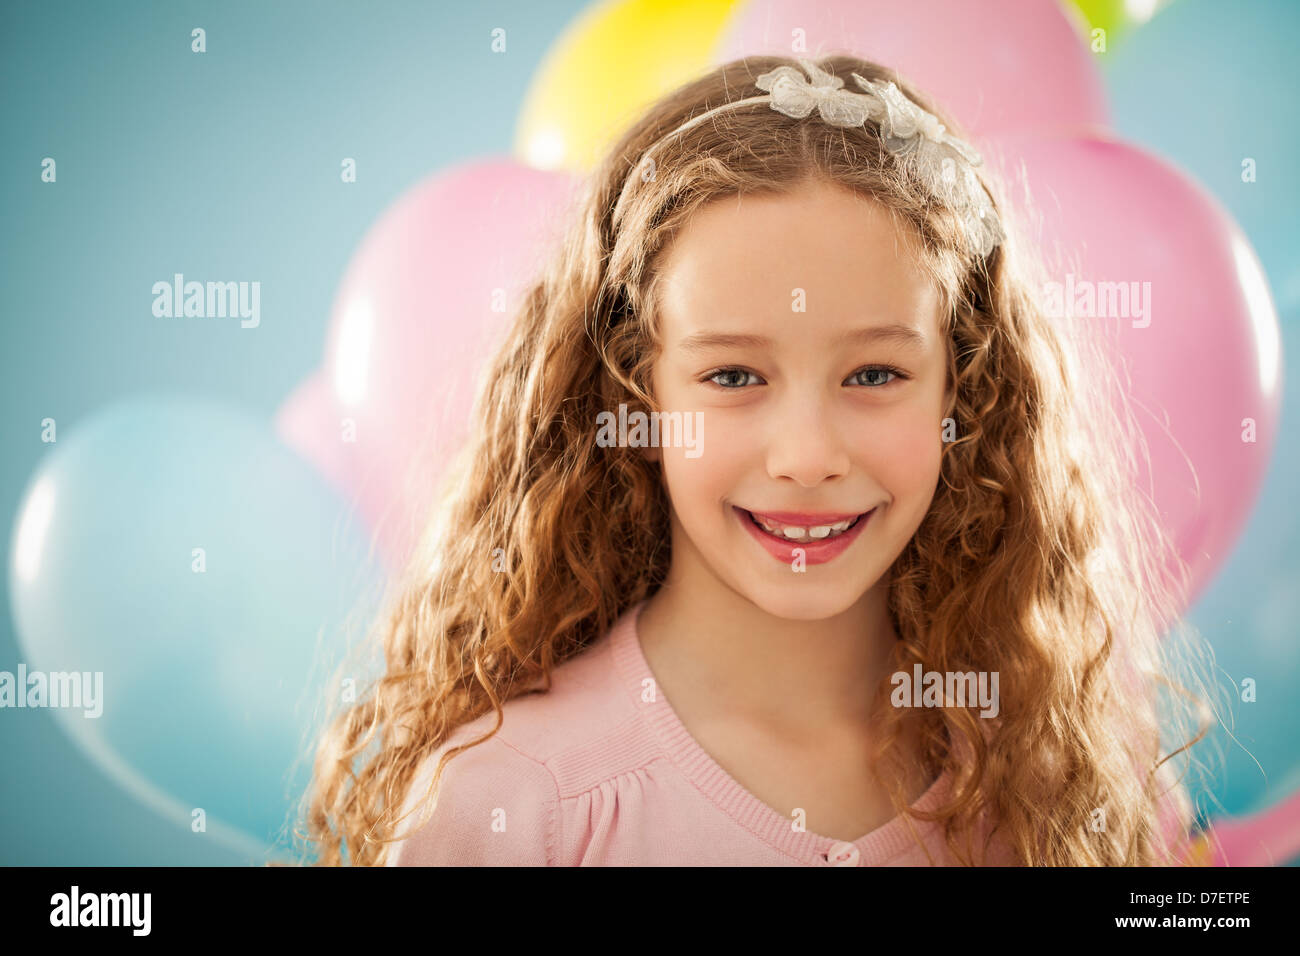 Beautiful smiling girl portrait with balloons in front of blue background. Stock Photo